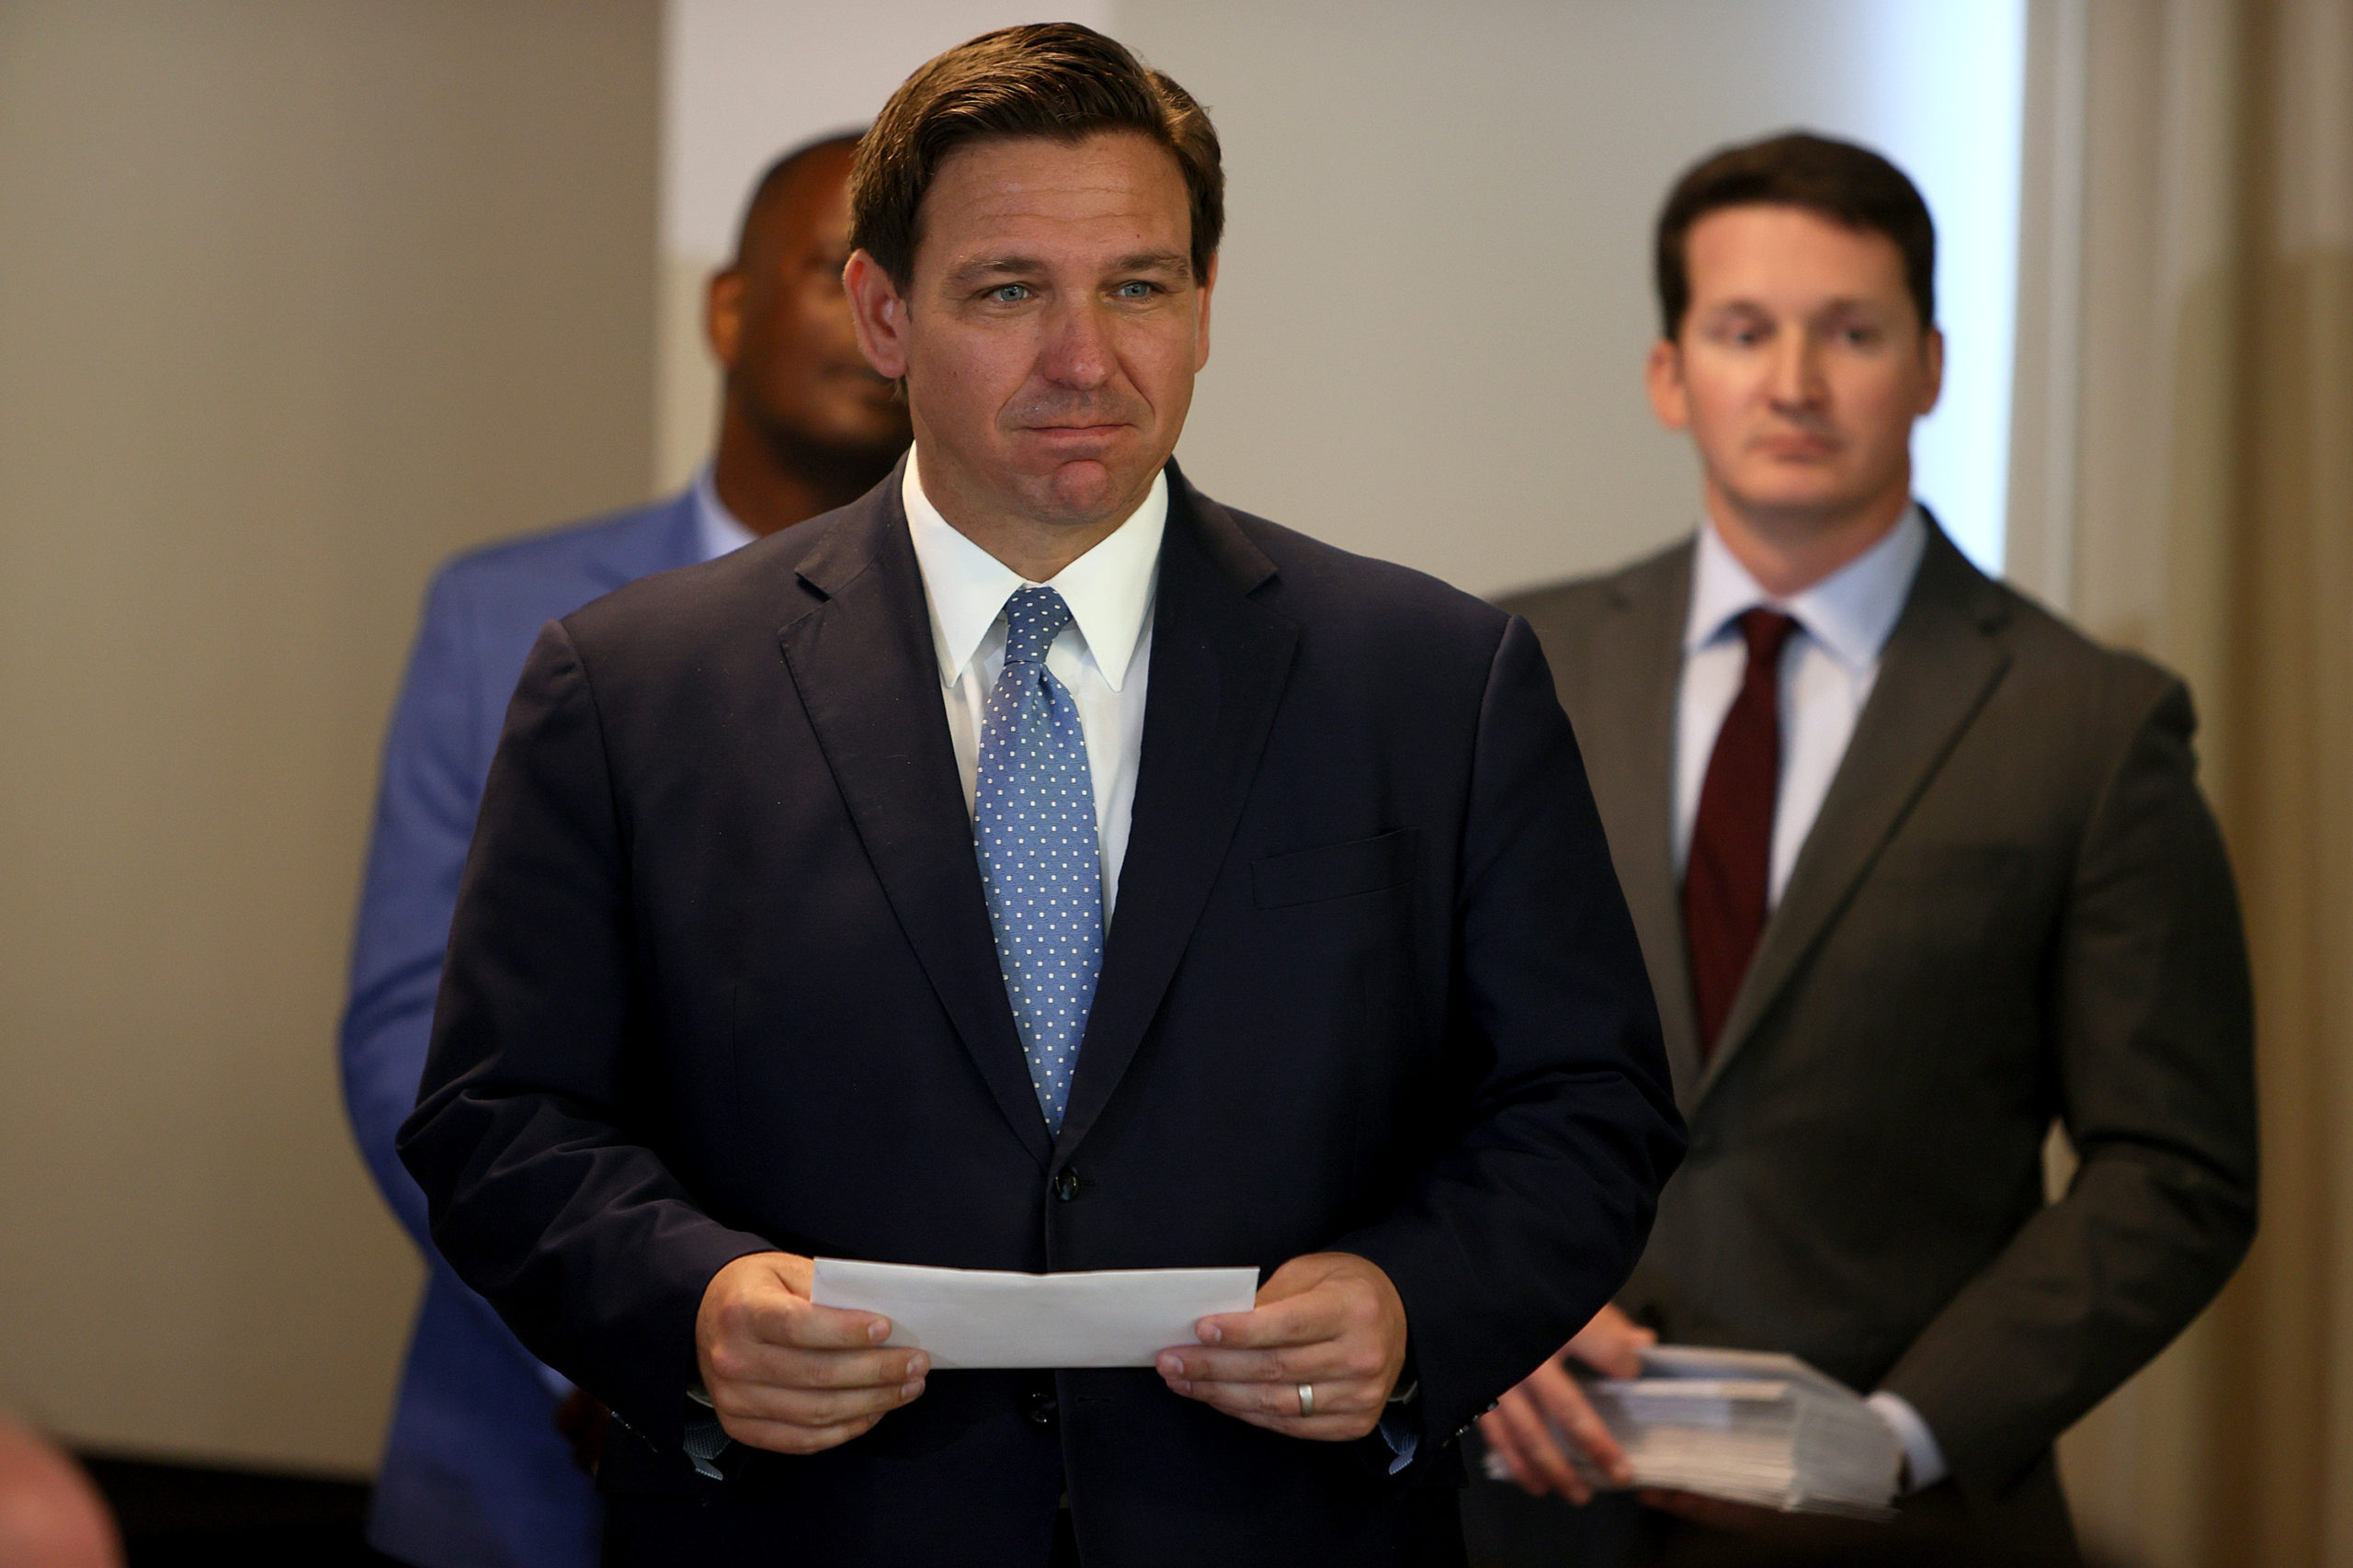 SURFSIDE, FLORIDA - AUGUST 10: Florida Gov. Ron DeSantis waits to present a check to a first responder during an event to give out bonuses to them held at the Grand Beach Hotel Surfside on August 10, 2021 in Surfside, Florida. DeSantis gave out some of the $1,000 checks that the Florida state budget passed for both first responders and teachers across the state. (Photo by Joe Raedle/Getty Images)